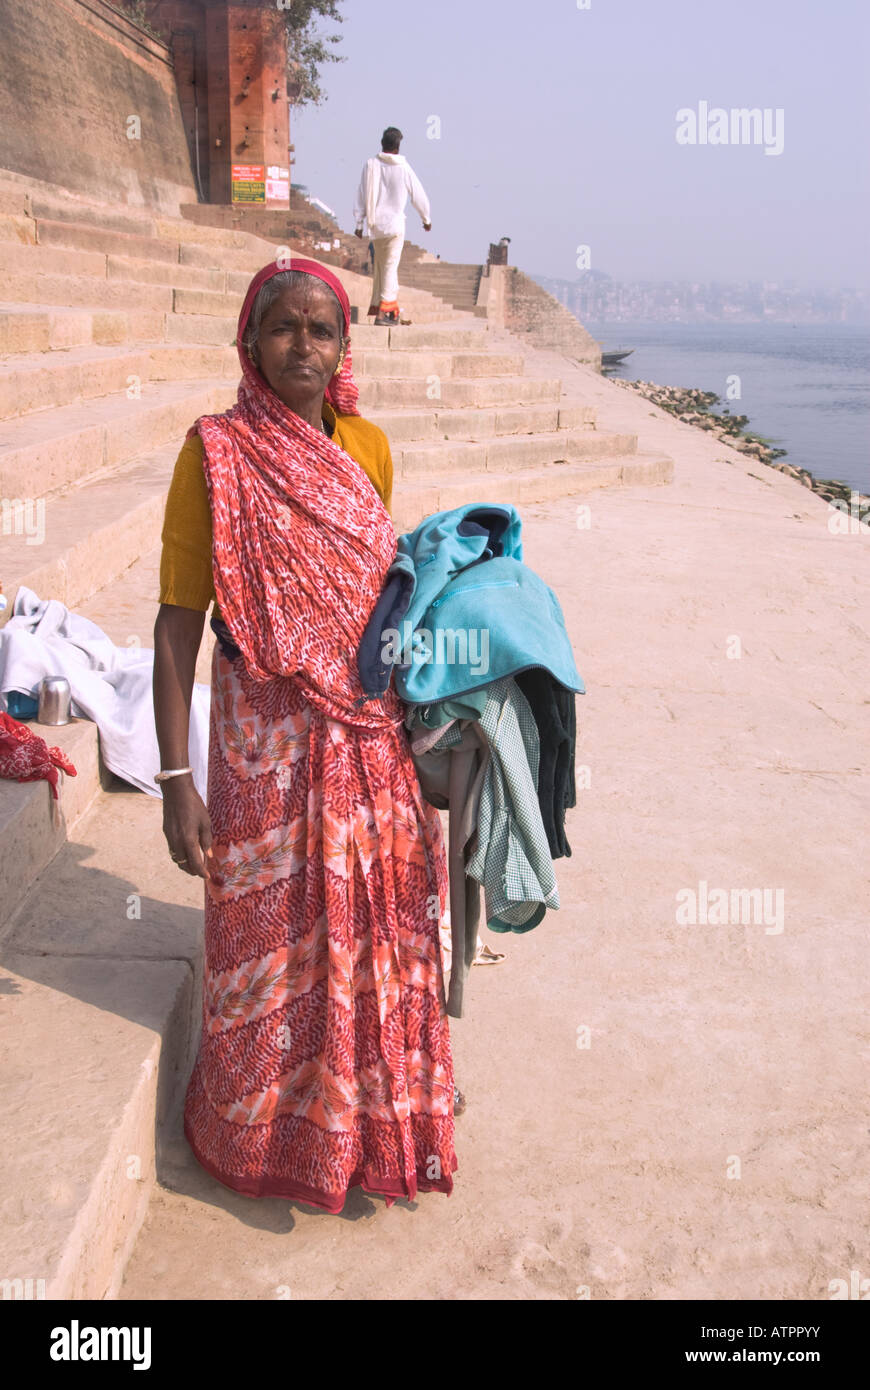 Portrait of a Washer woman on the ghats along the Ganges River in Varanasi, India. Stock Photo